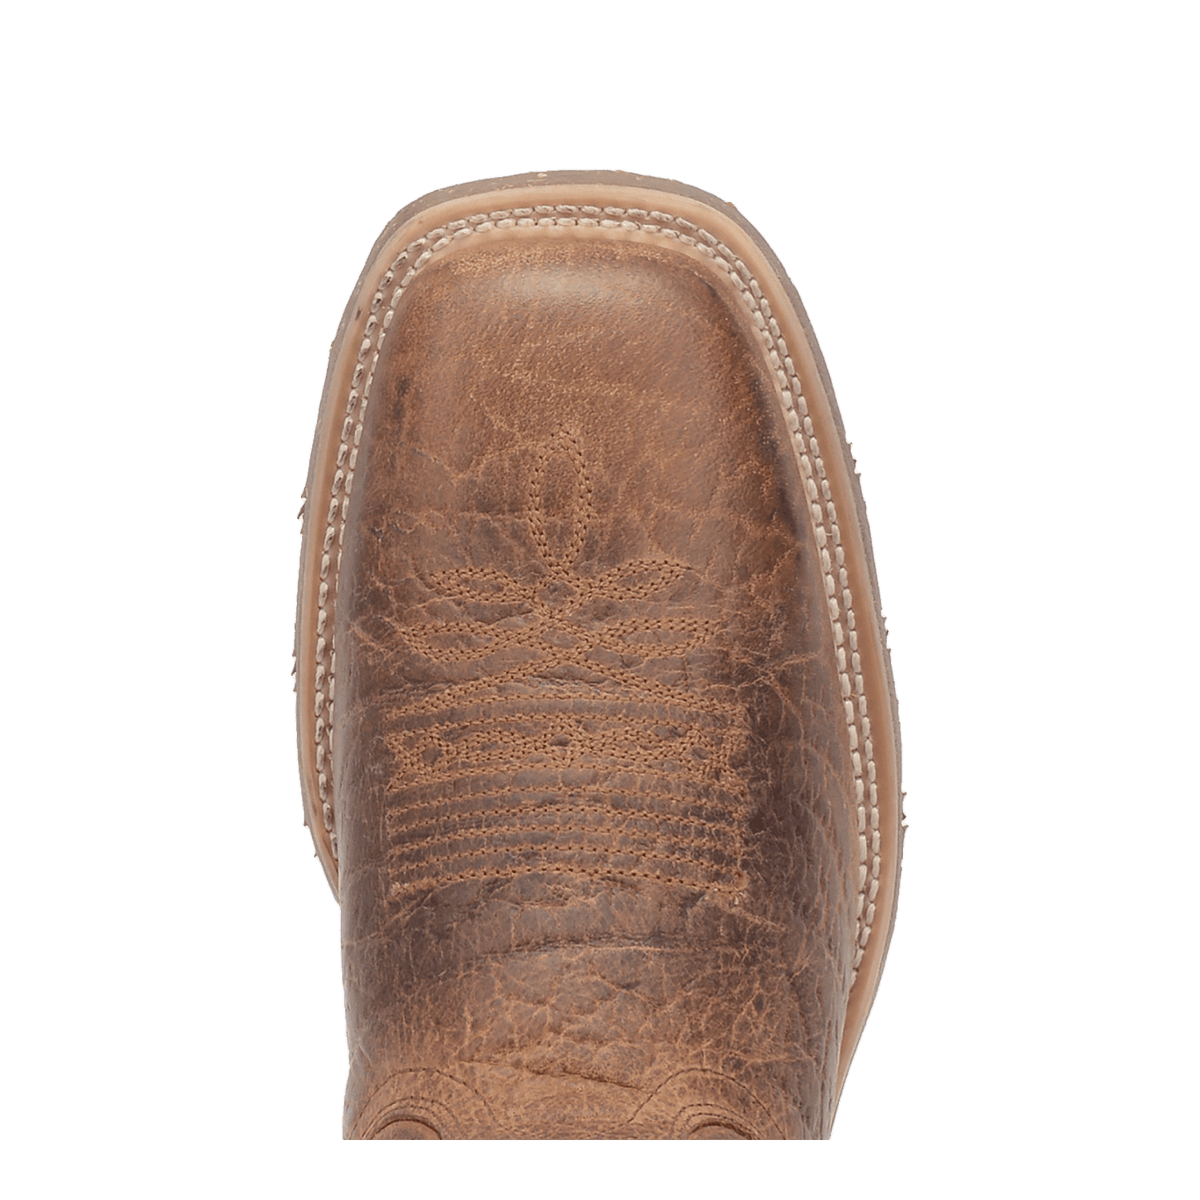 DURANT LEATHER BOOT Image